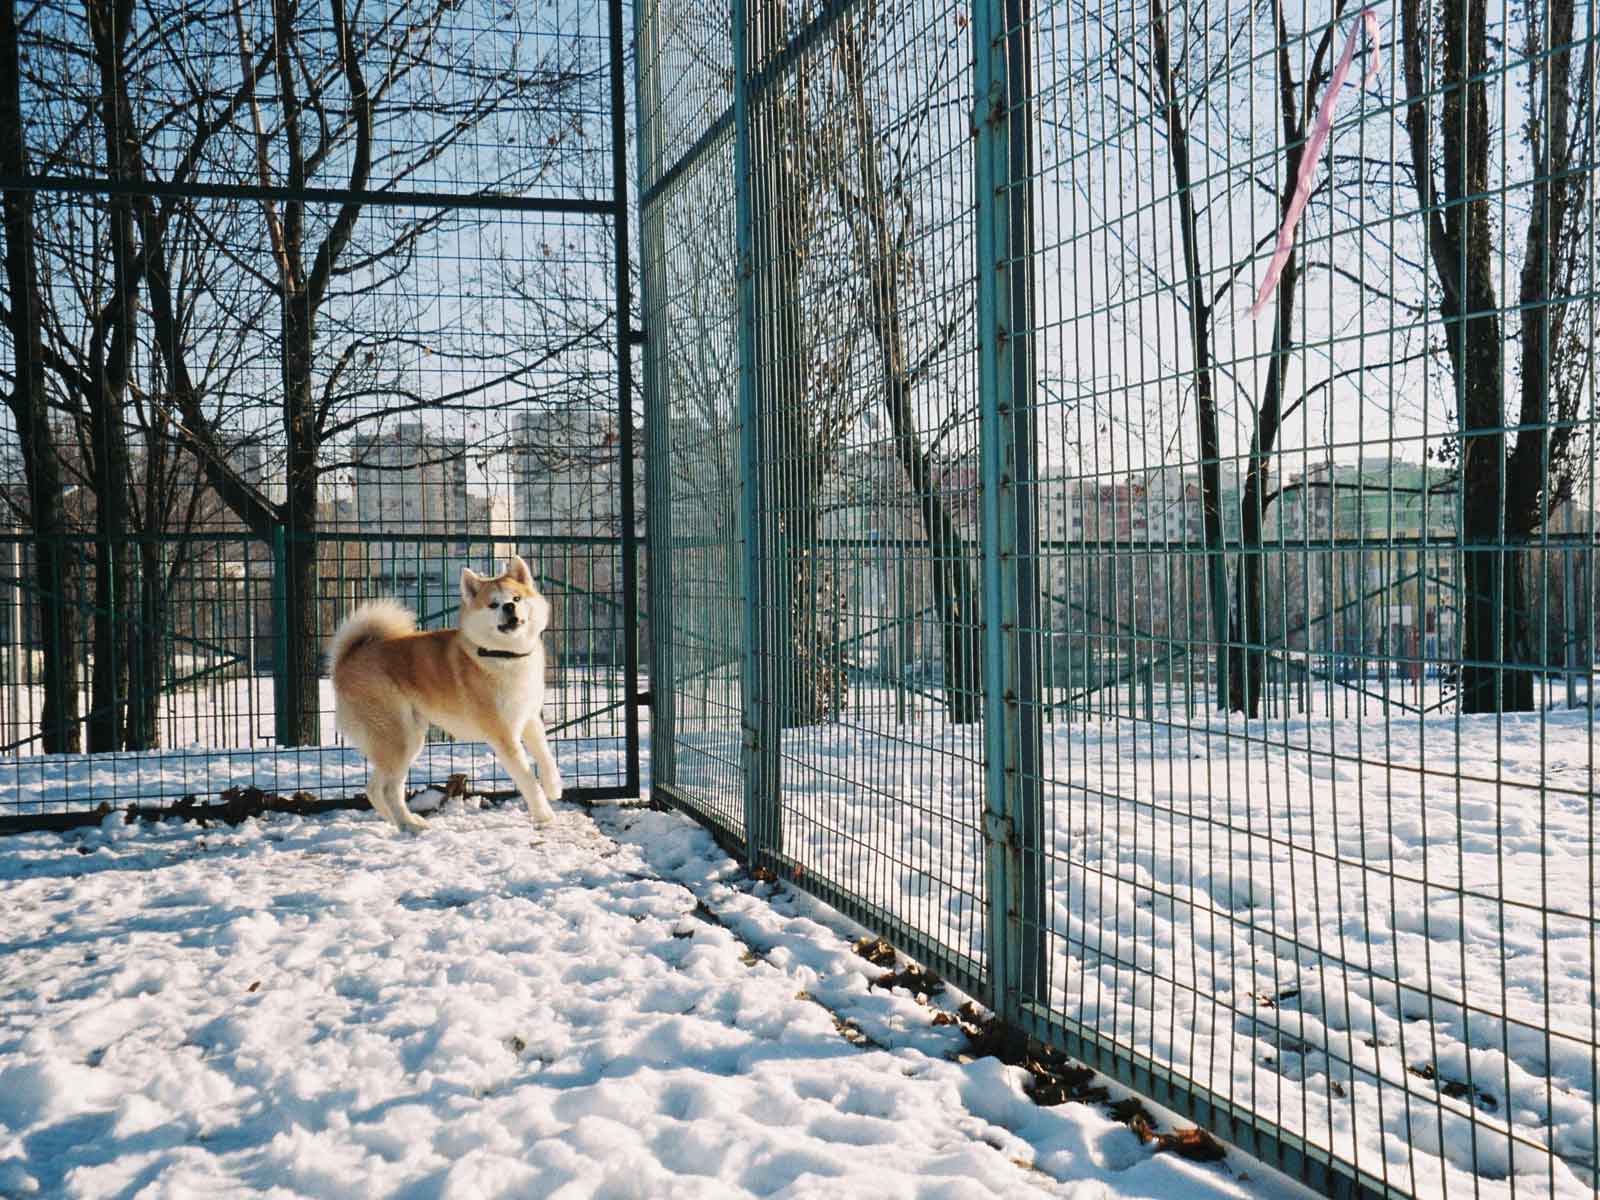 A dog in an enclosure